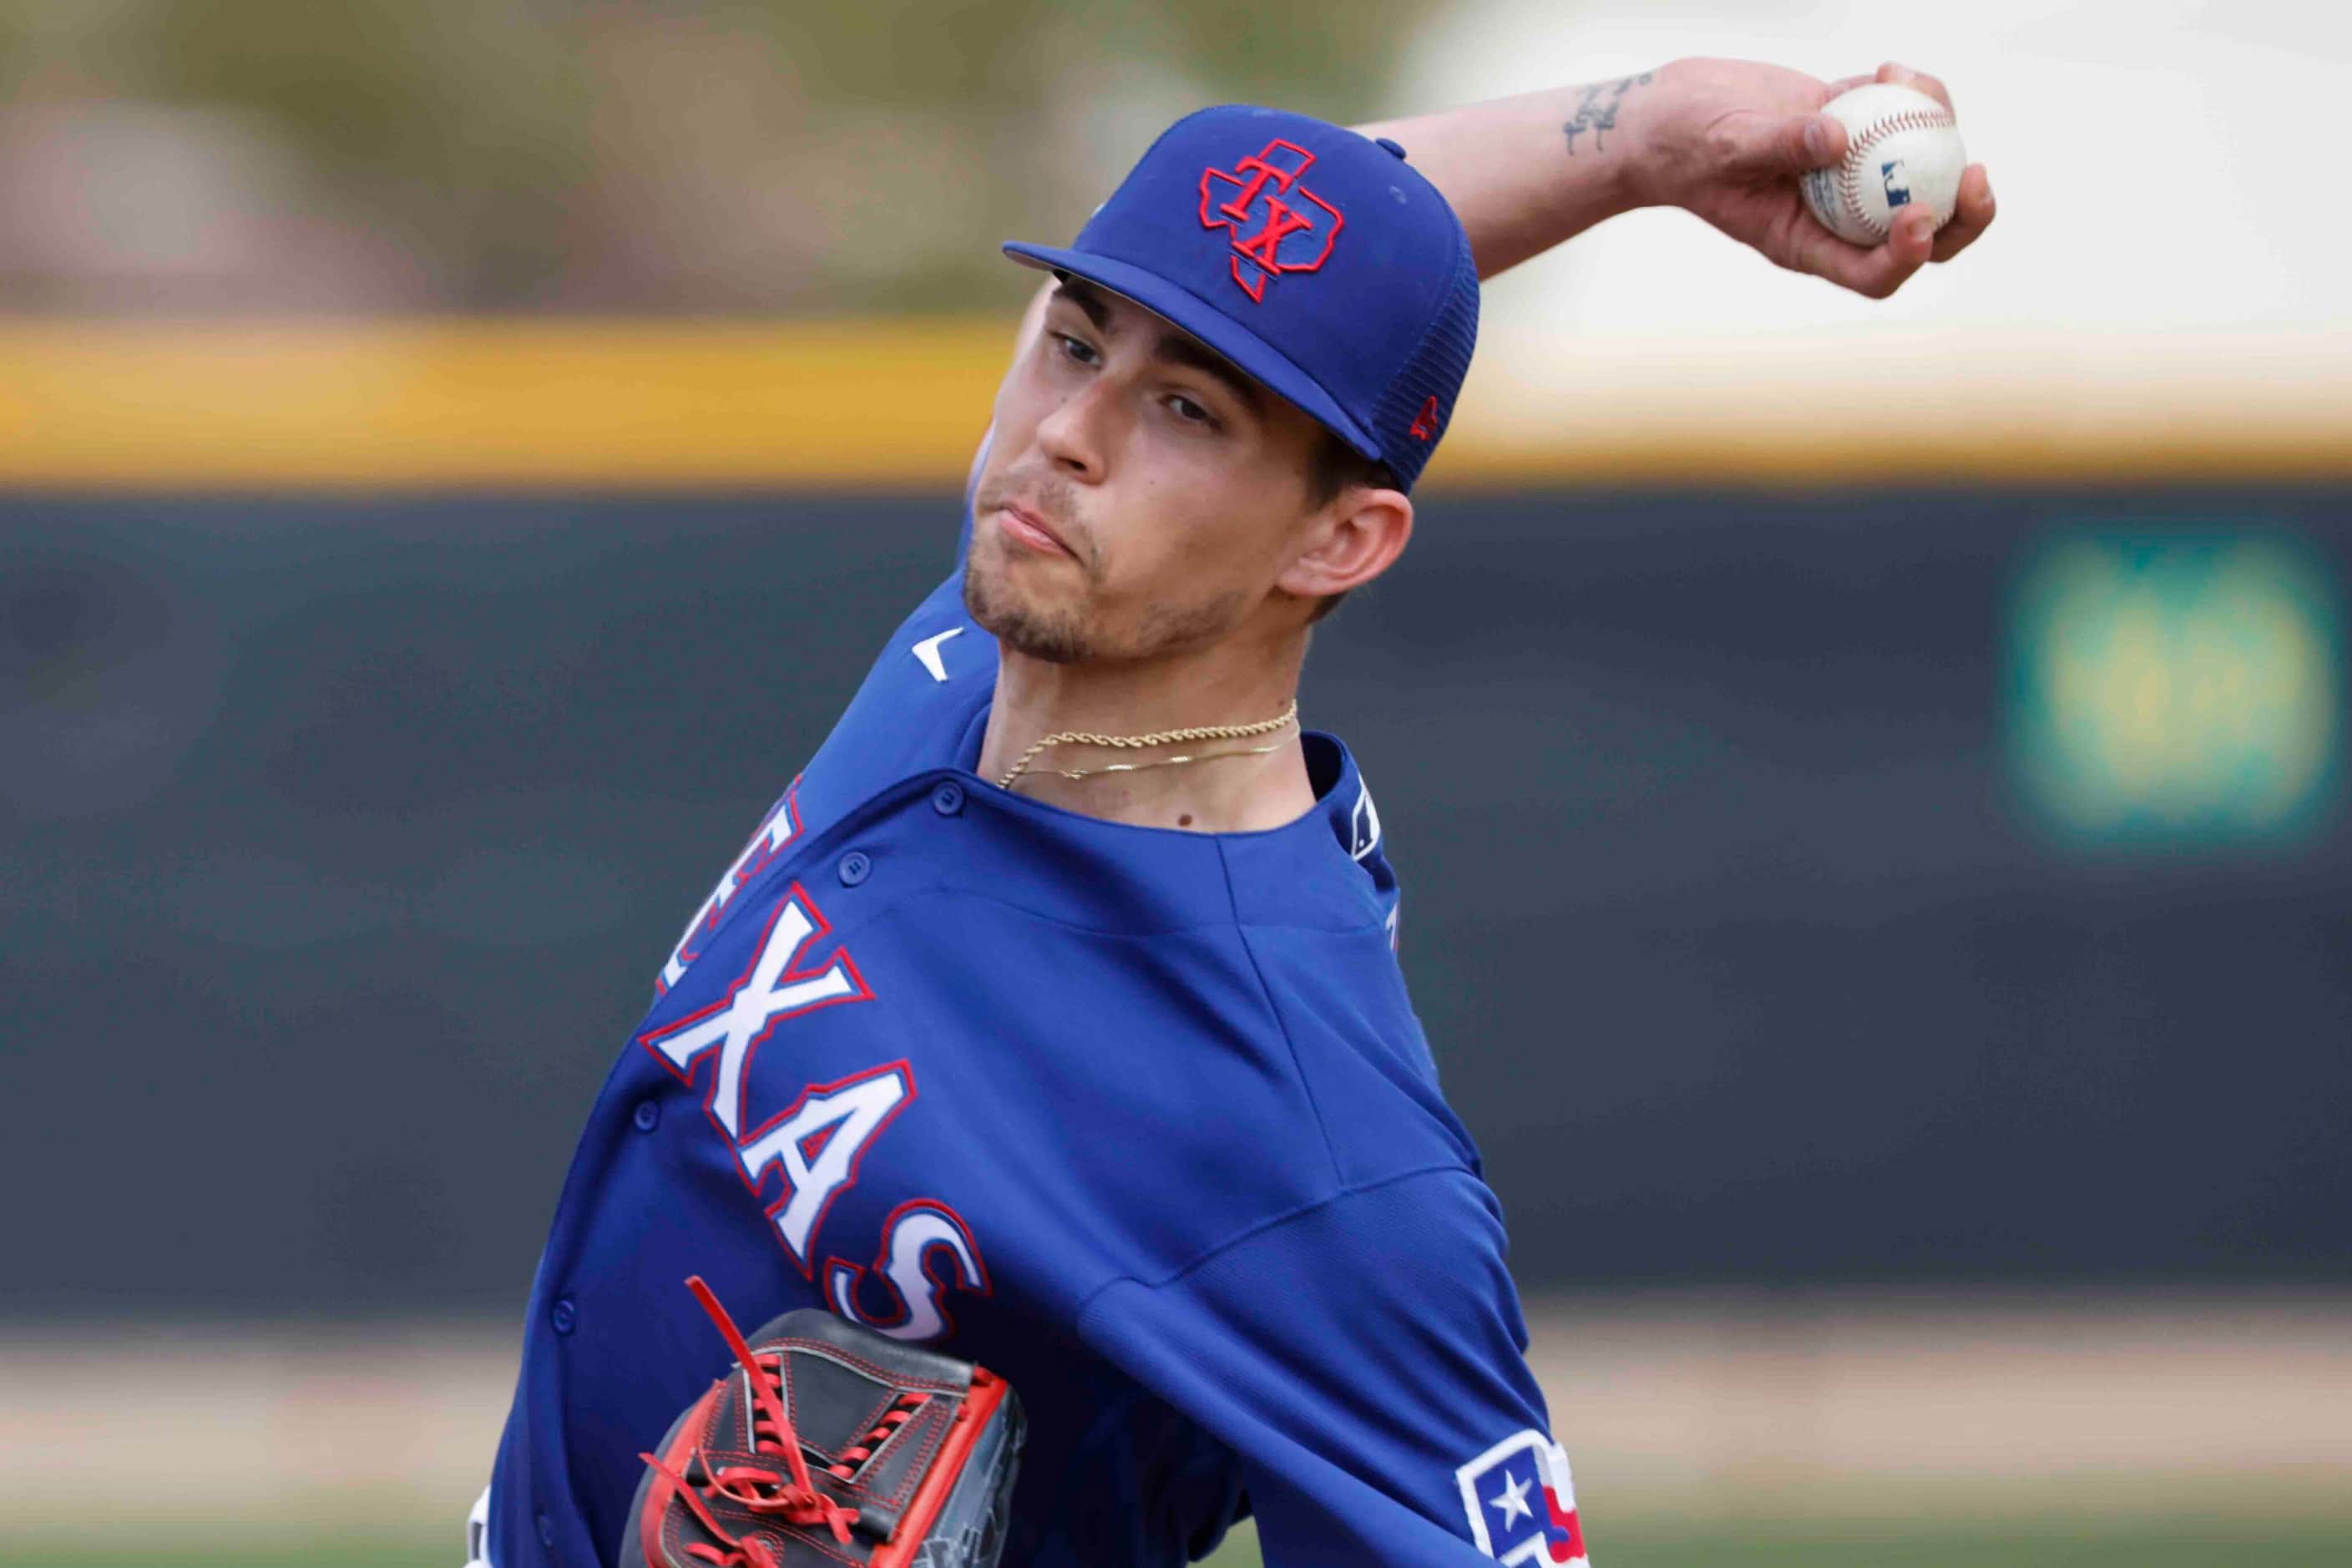 Texas Rangers pitcher Ricky Vanasco pitches during a spring training workout at the team's...